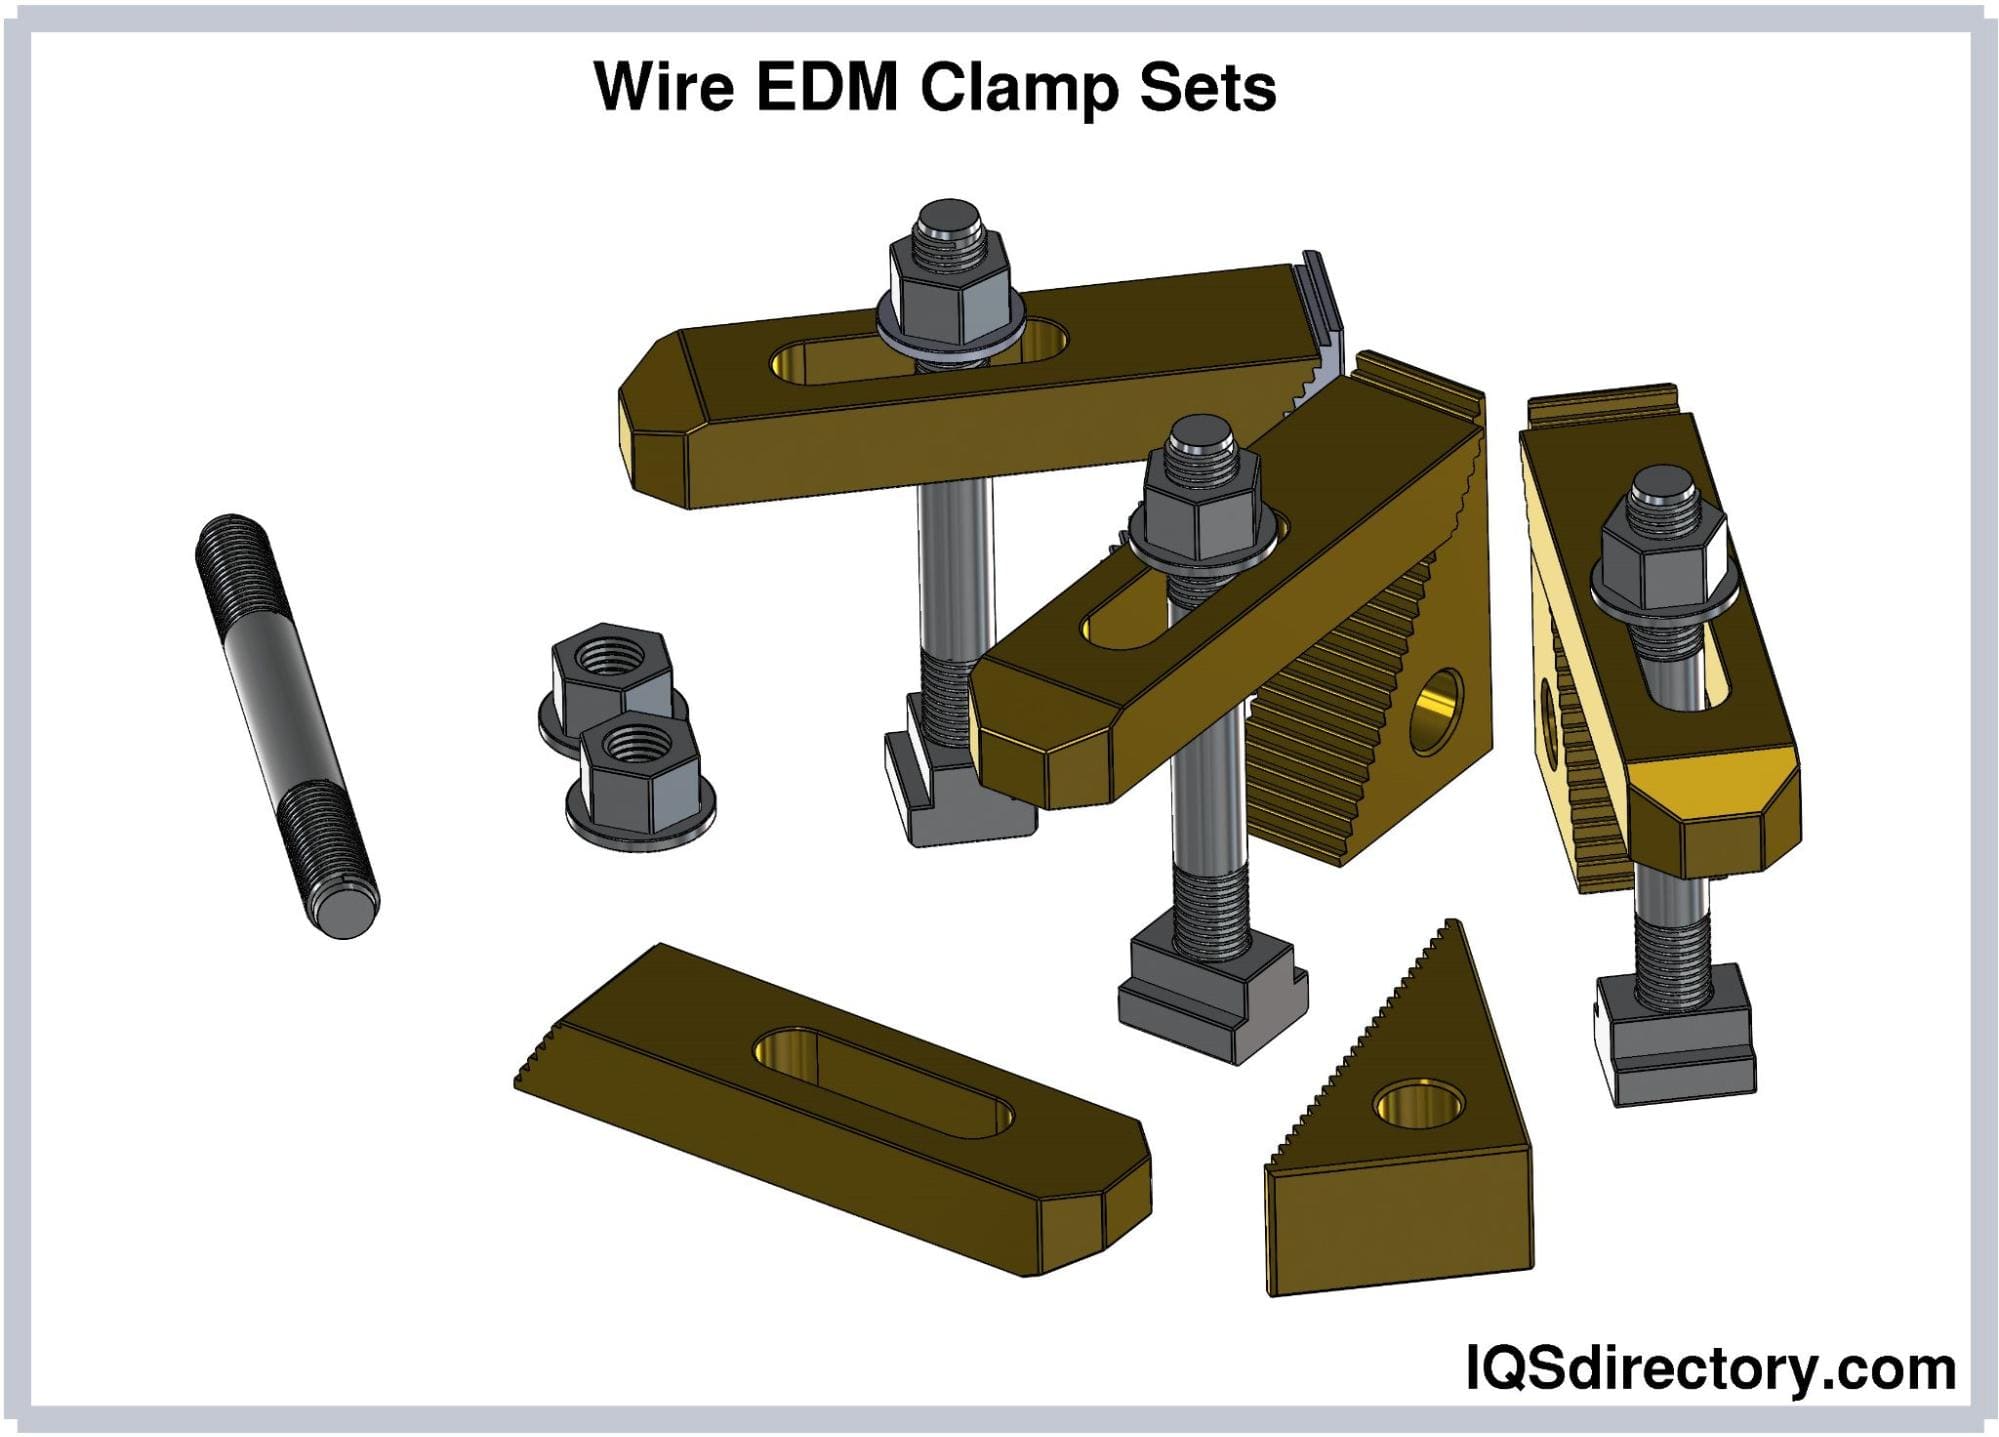 Wire EDM Clamp Sets